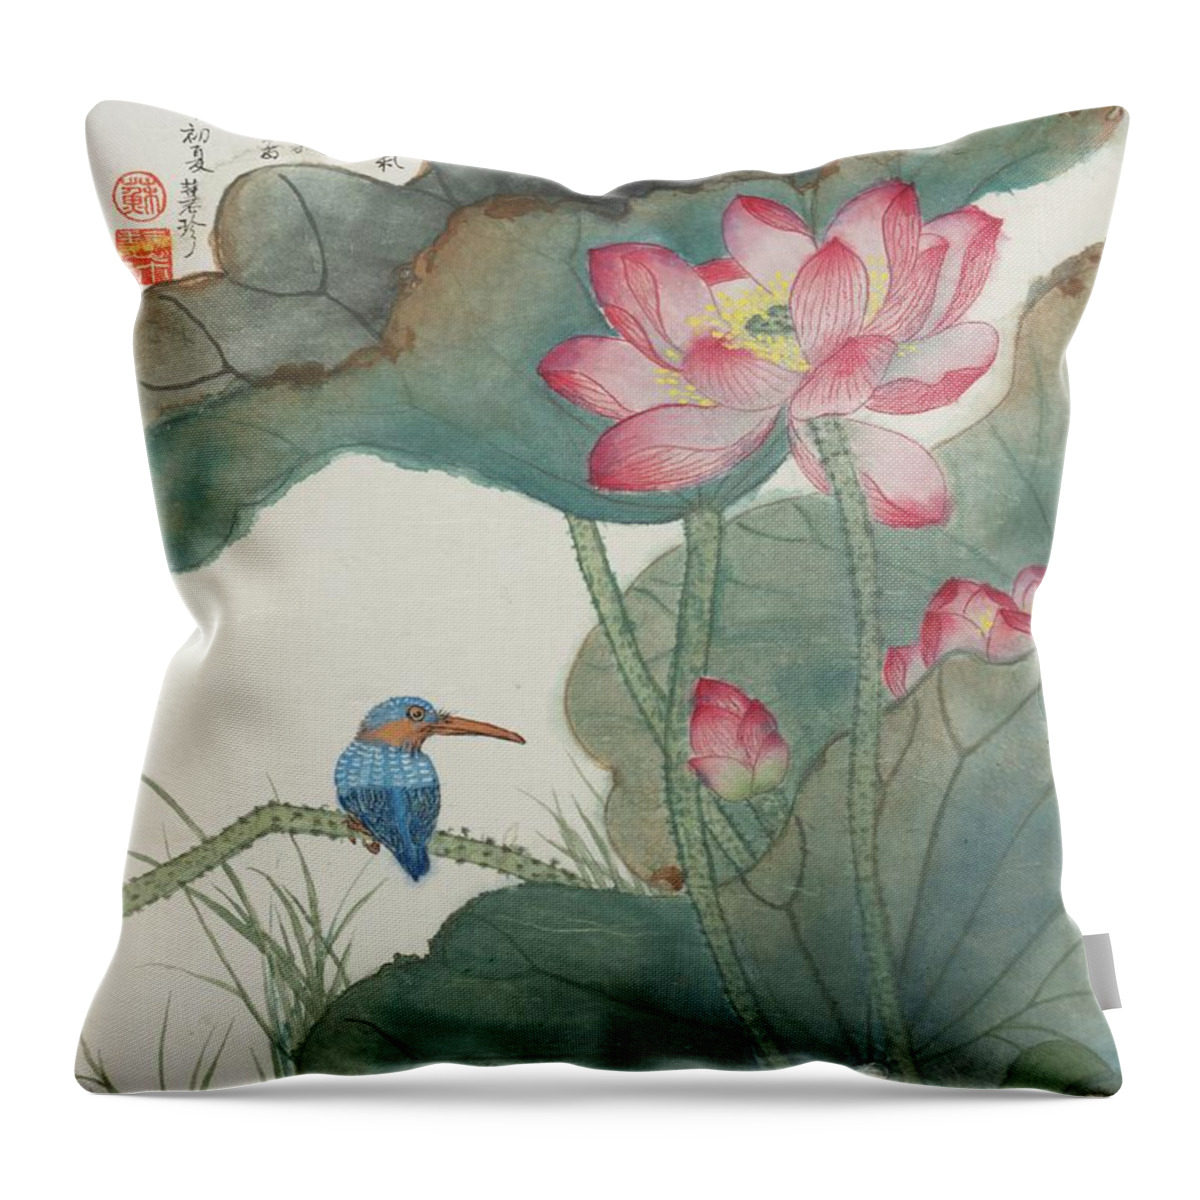 Chinese Watercolor Throw Pillow featuring the painting Jade Bird and Lotus Flowers by Jenny Sanders